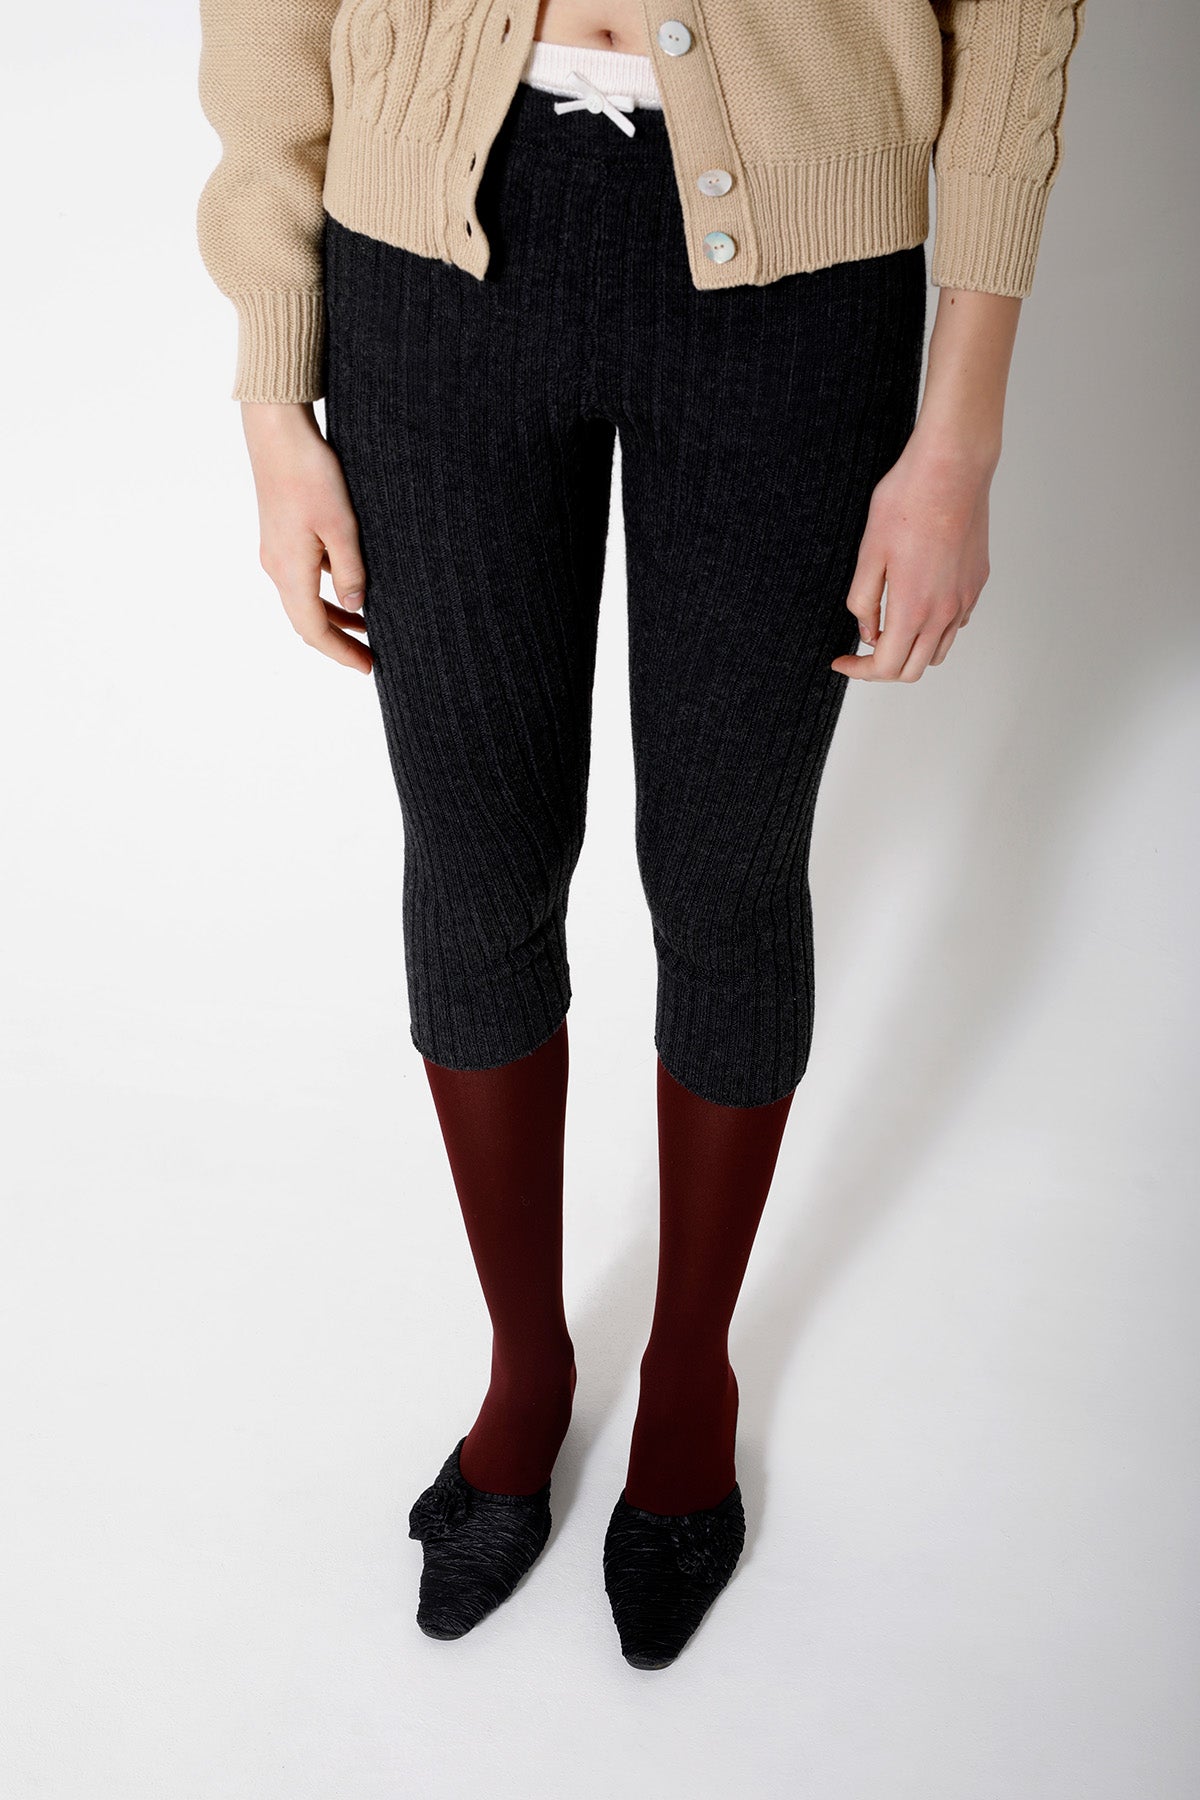 THE KNITTED CAPRIS